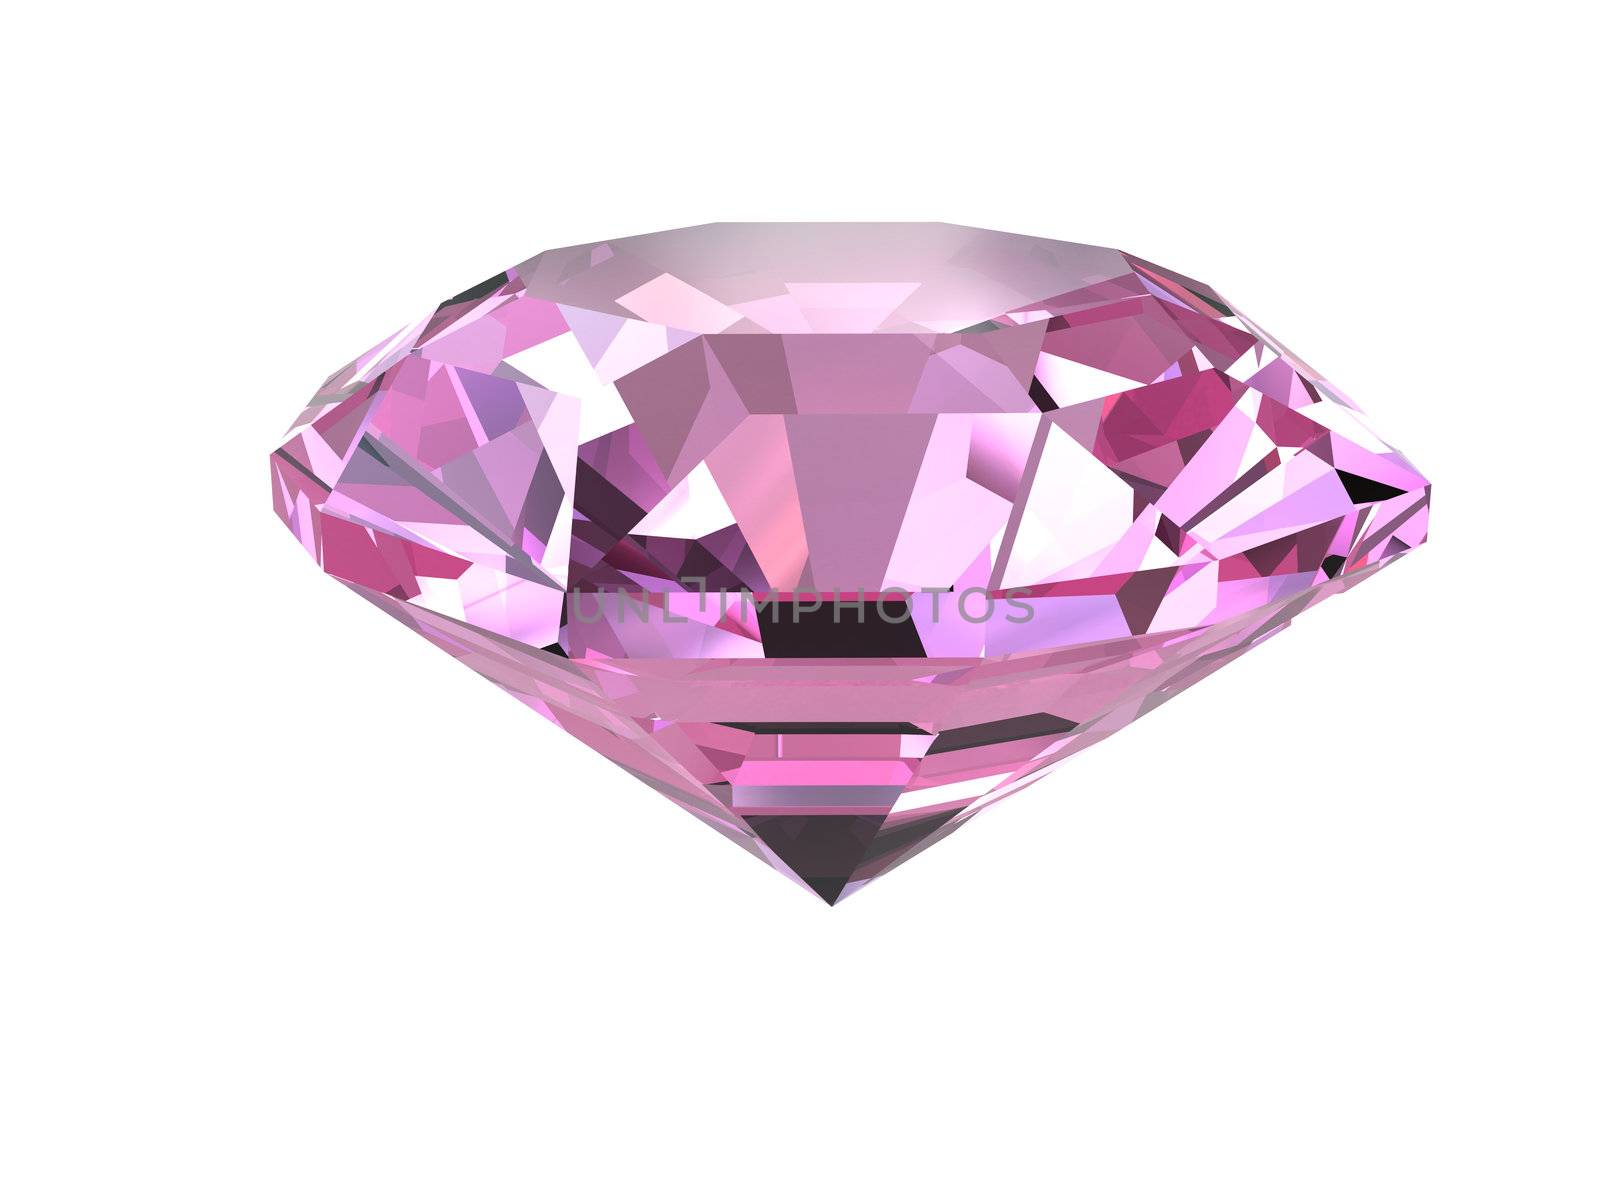 Pink diamond isolated on white background. High resolution 3D render